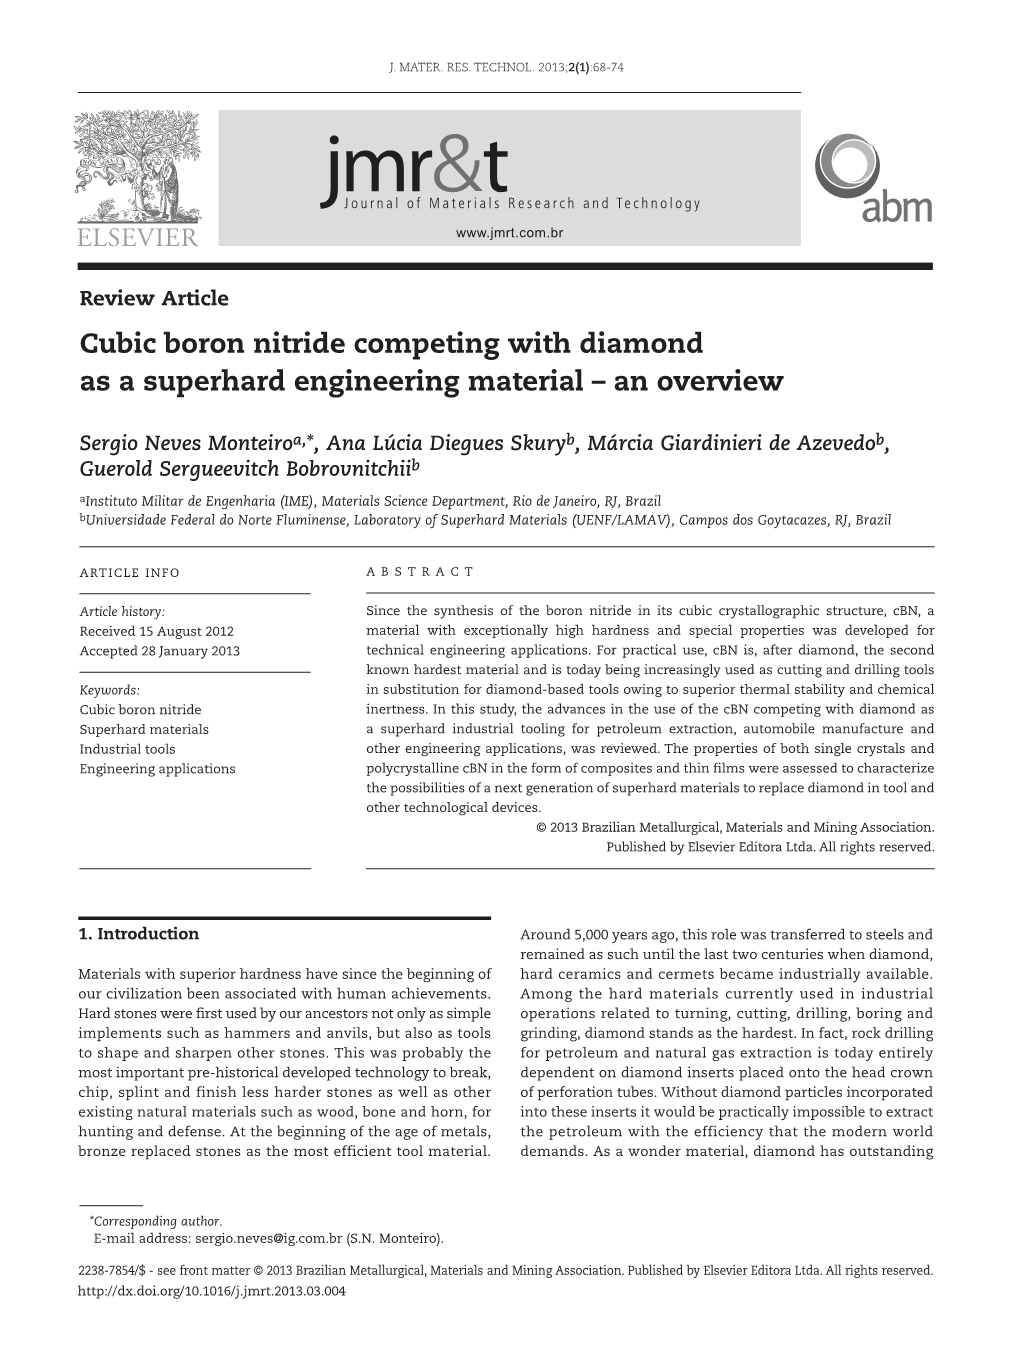 Cubic Boron Nitride Competing with Diamond As a Superhard Engineering Material – an Overview